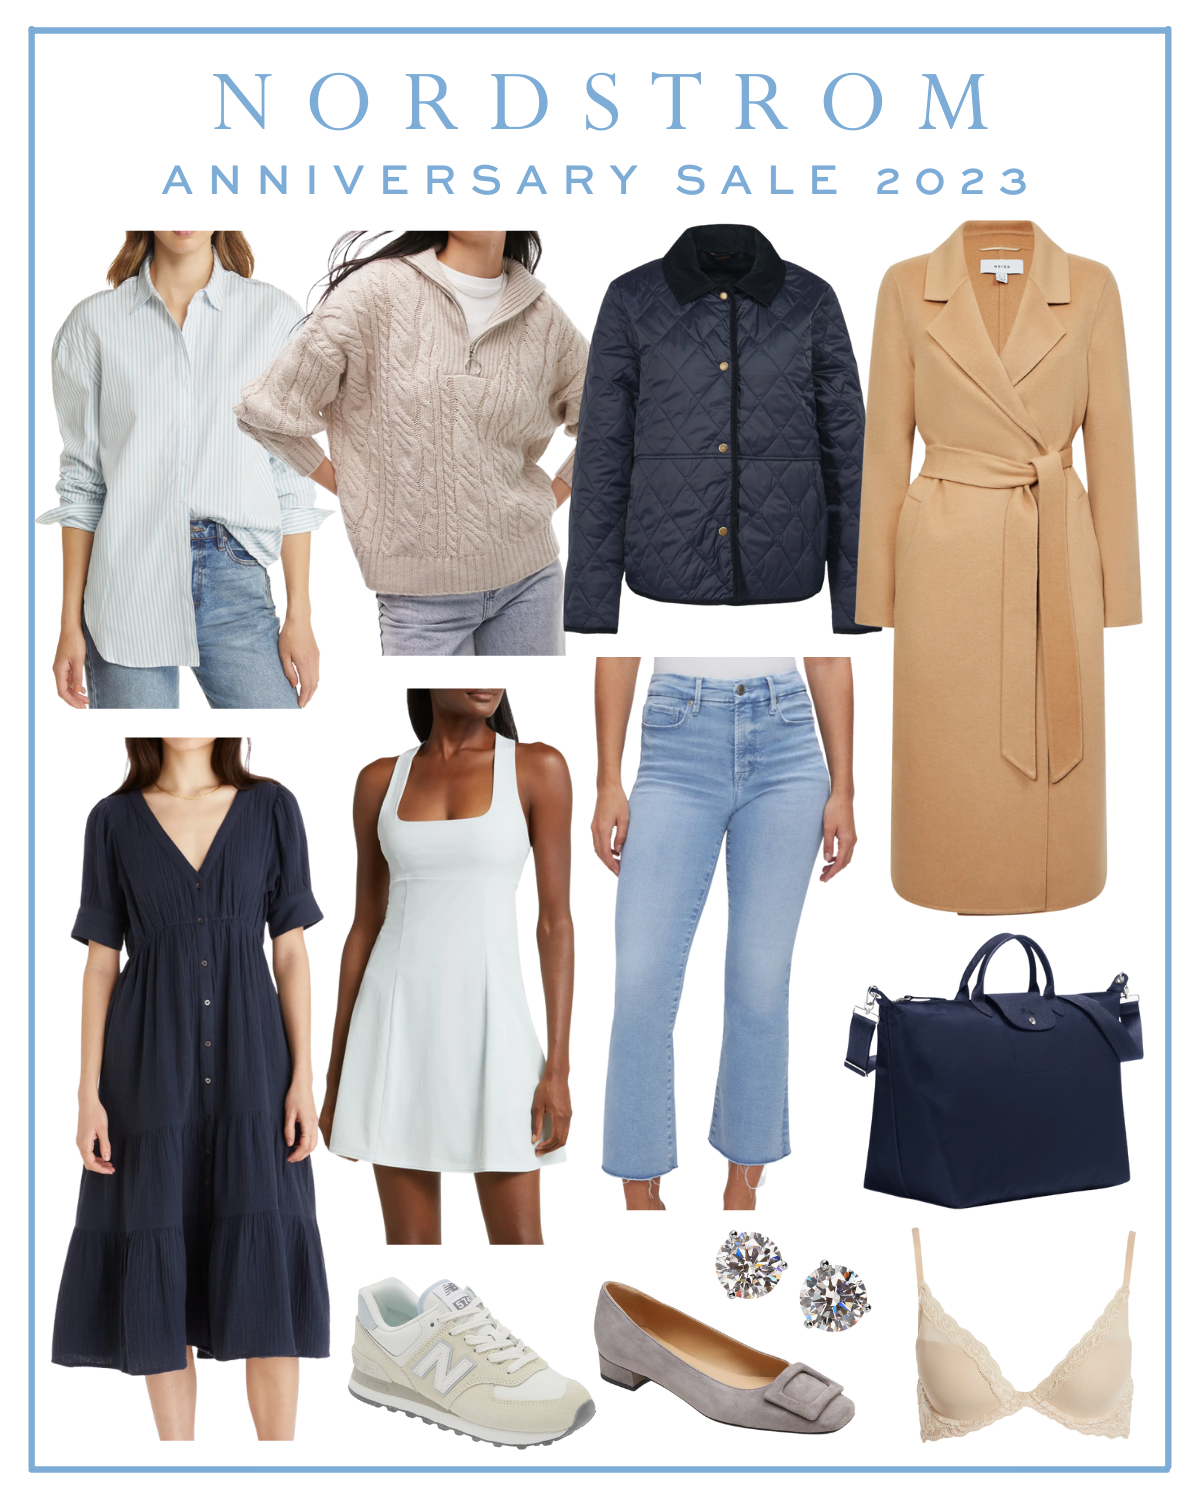 Buy now, wear now from the Nordstrom Anniversary Sale 2018